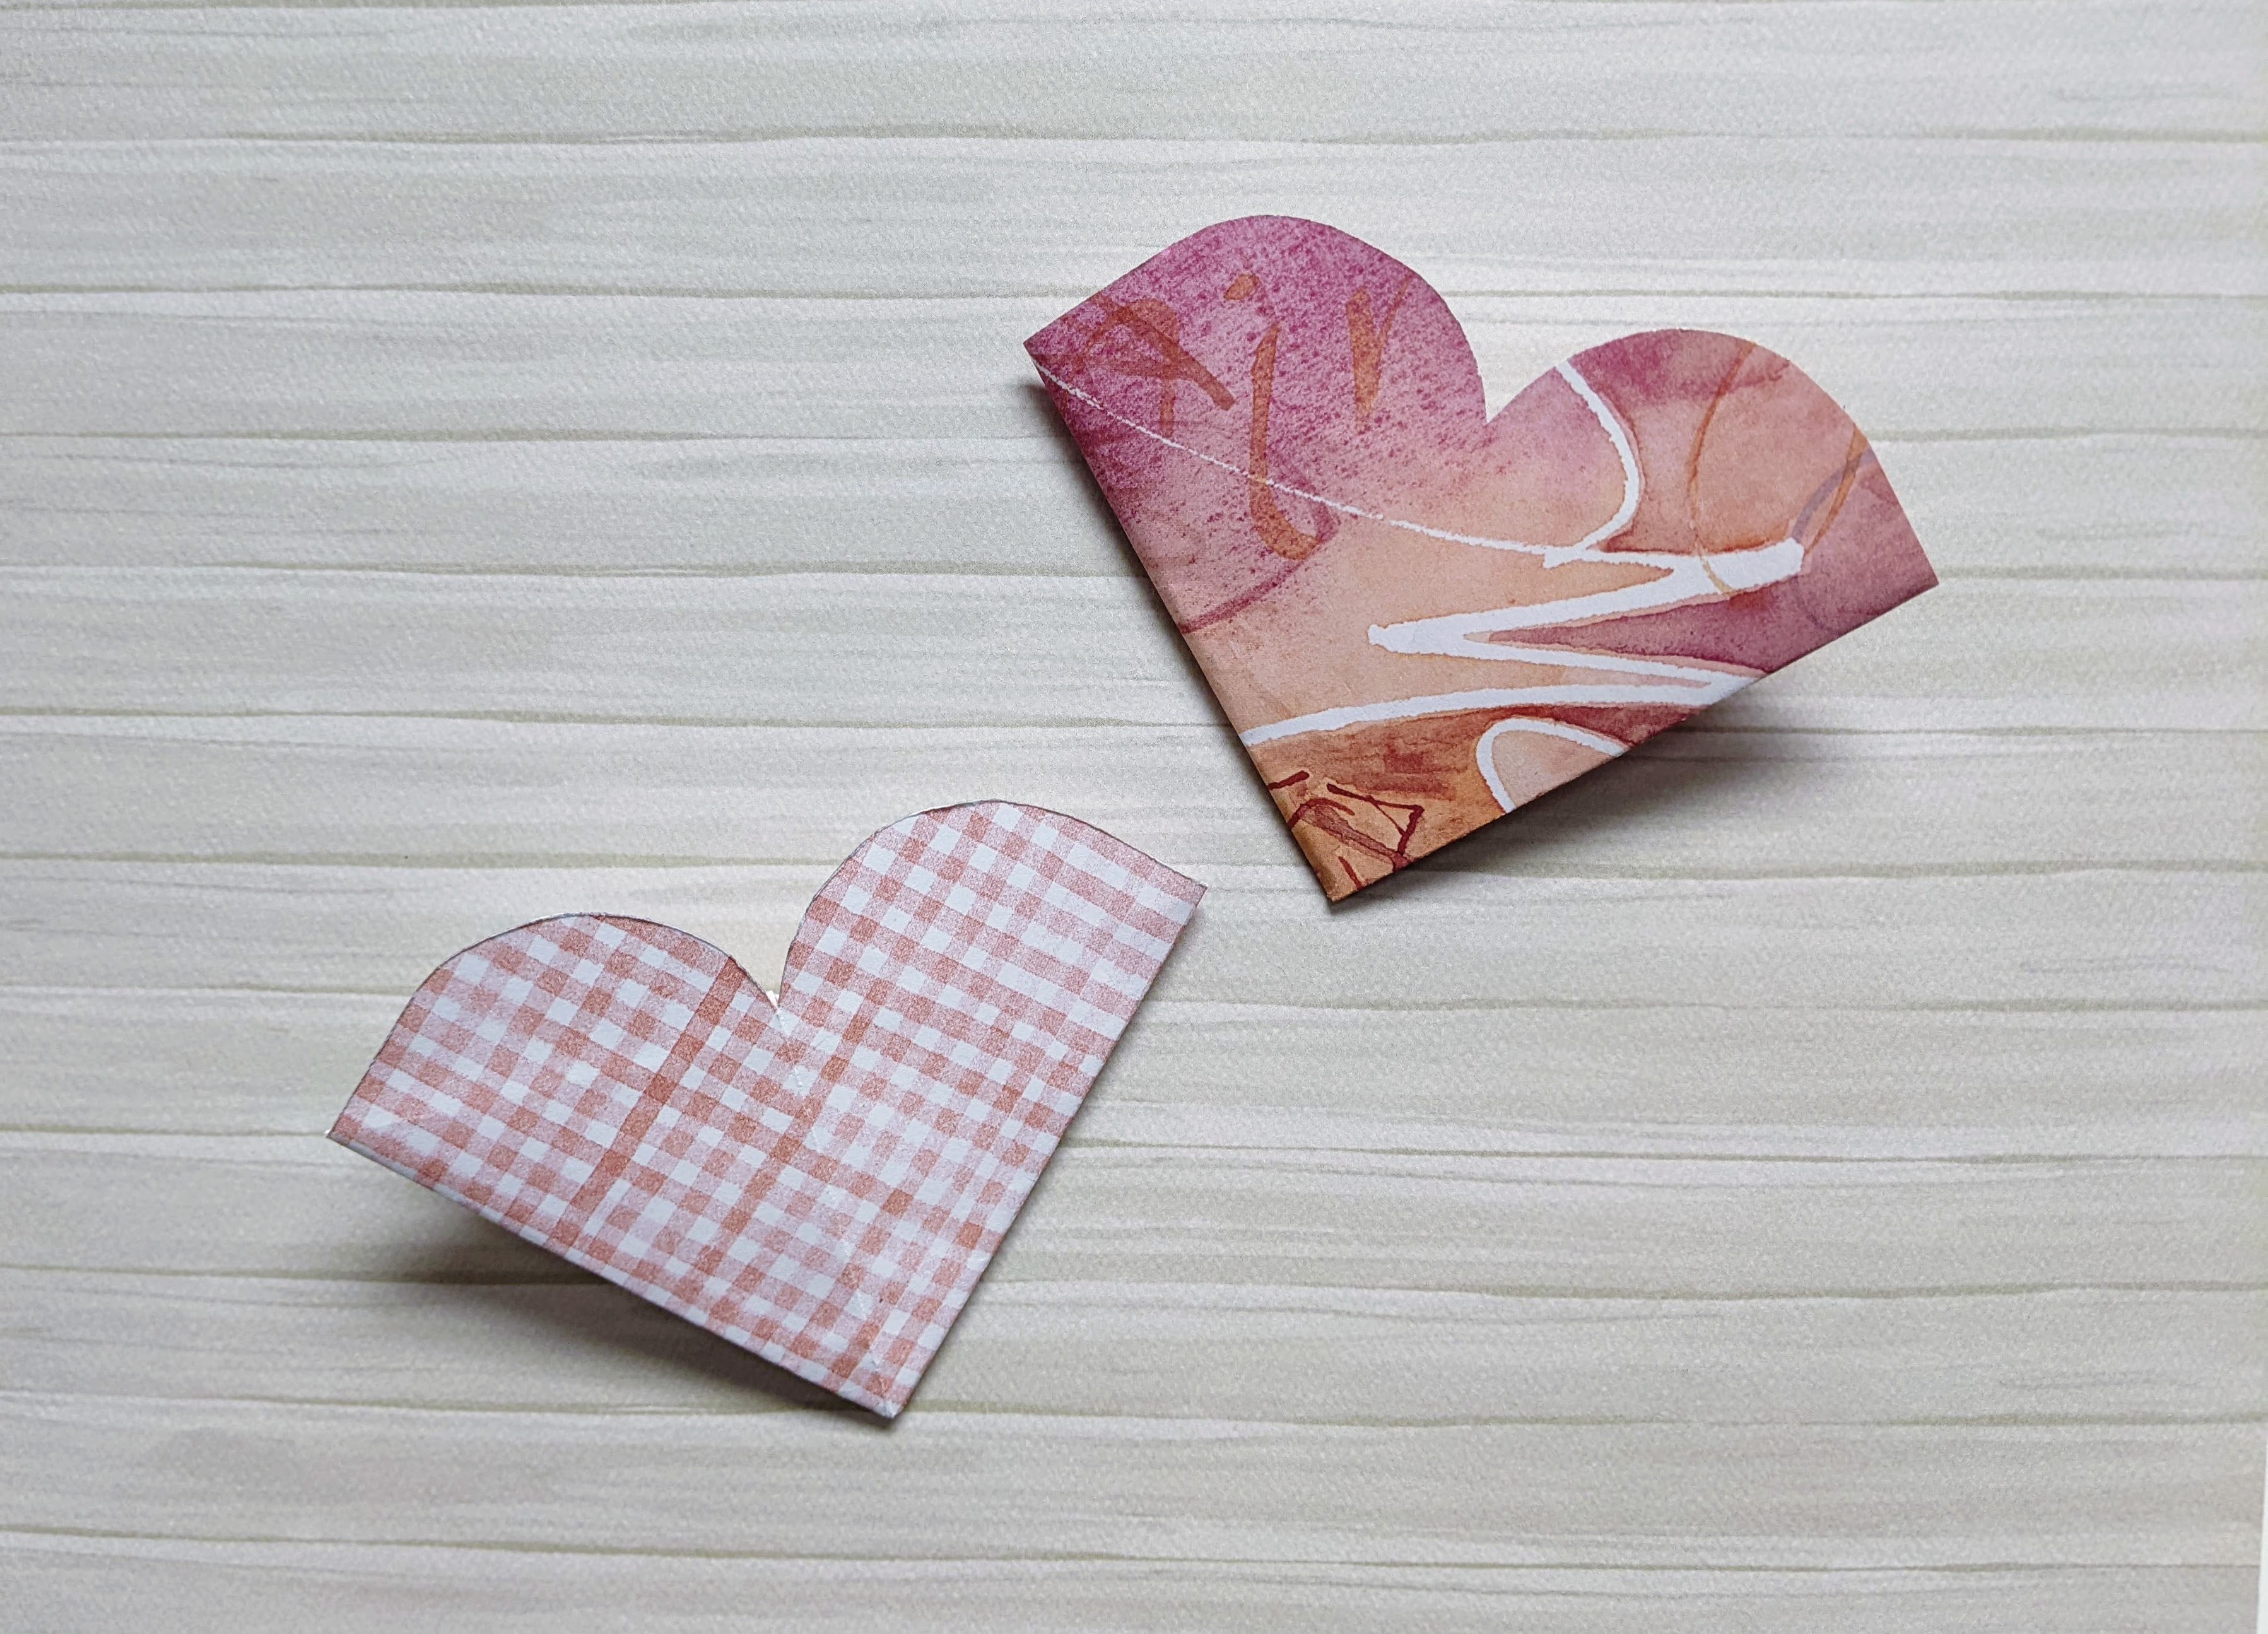 Two heart-shaped bookmarks. The one on the left is a white and pink gingham design, and the one on the right is an abstract design with pinks, white, and orange.